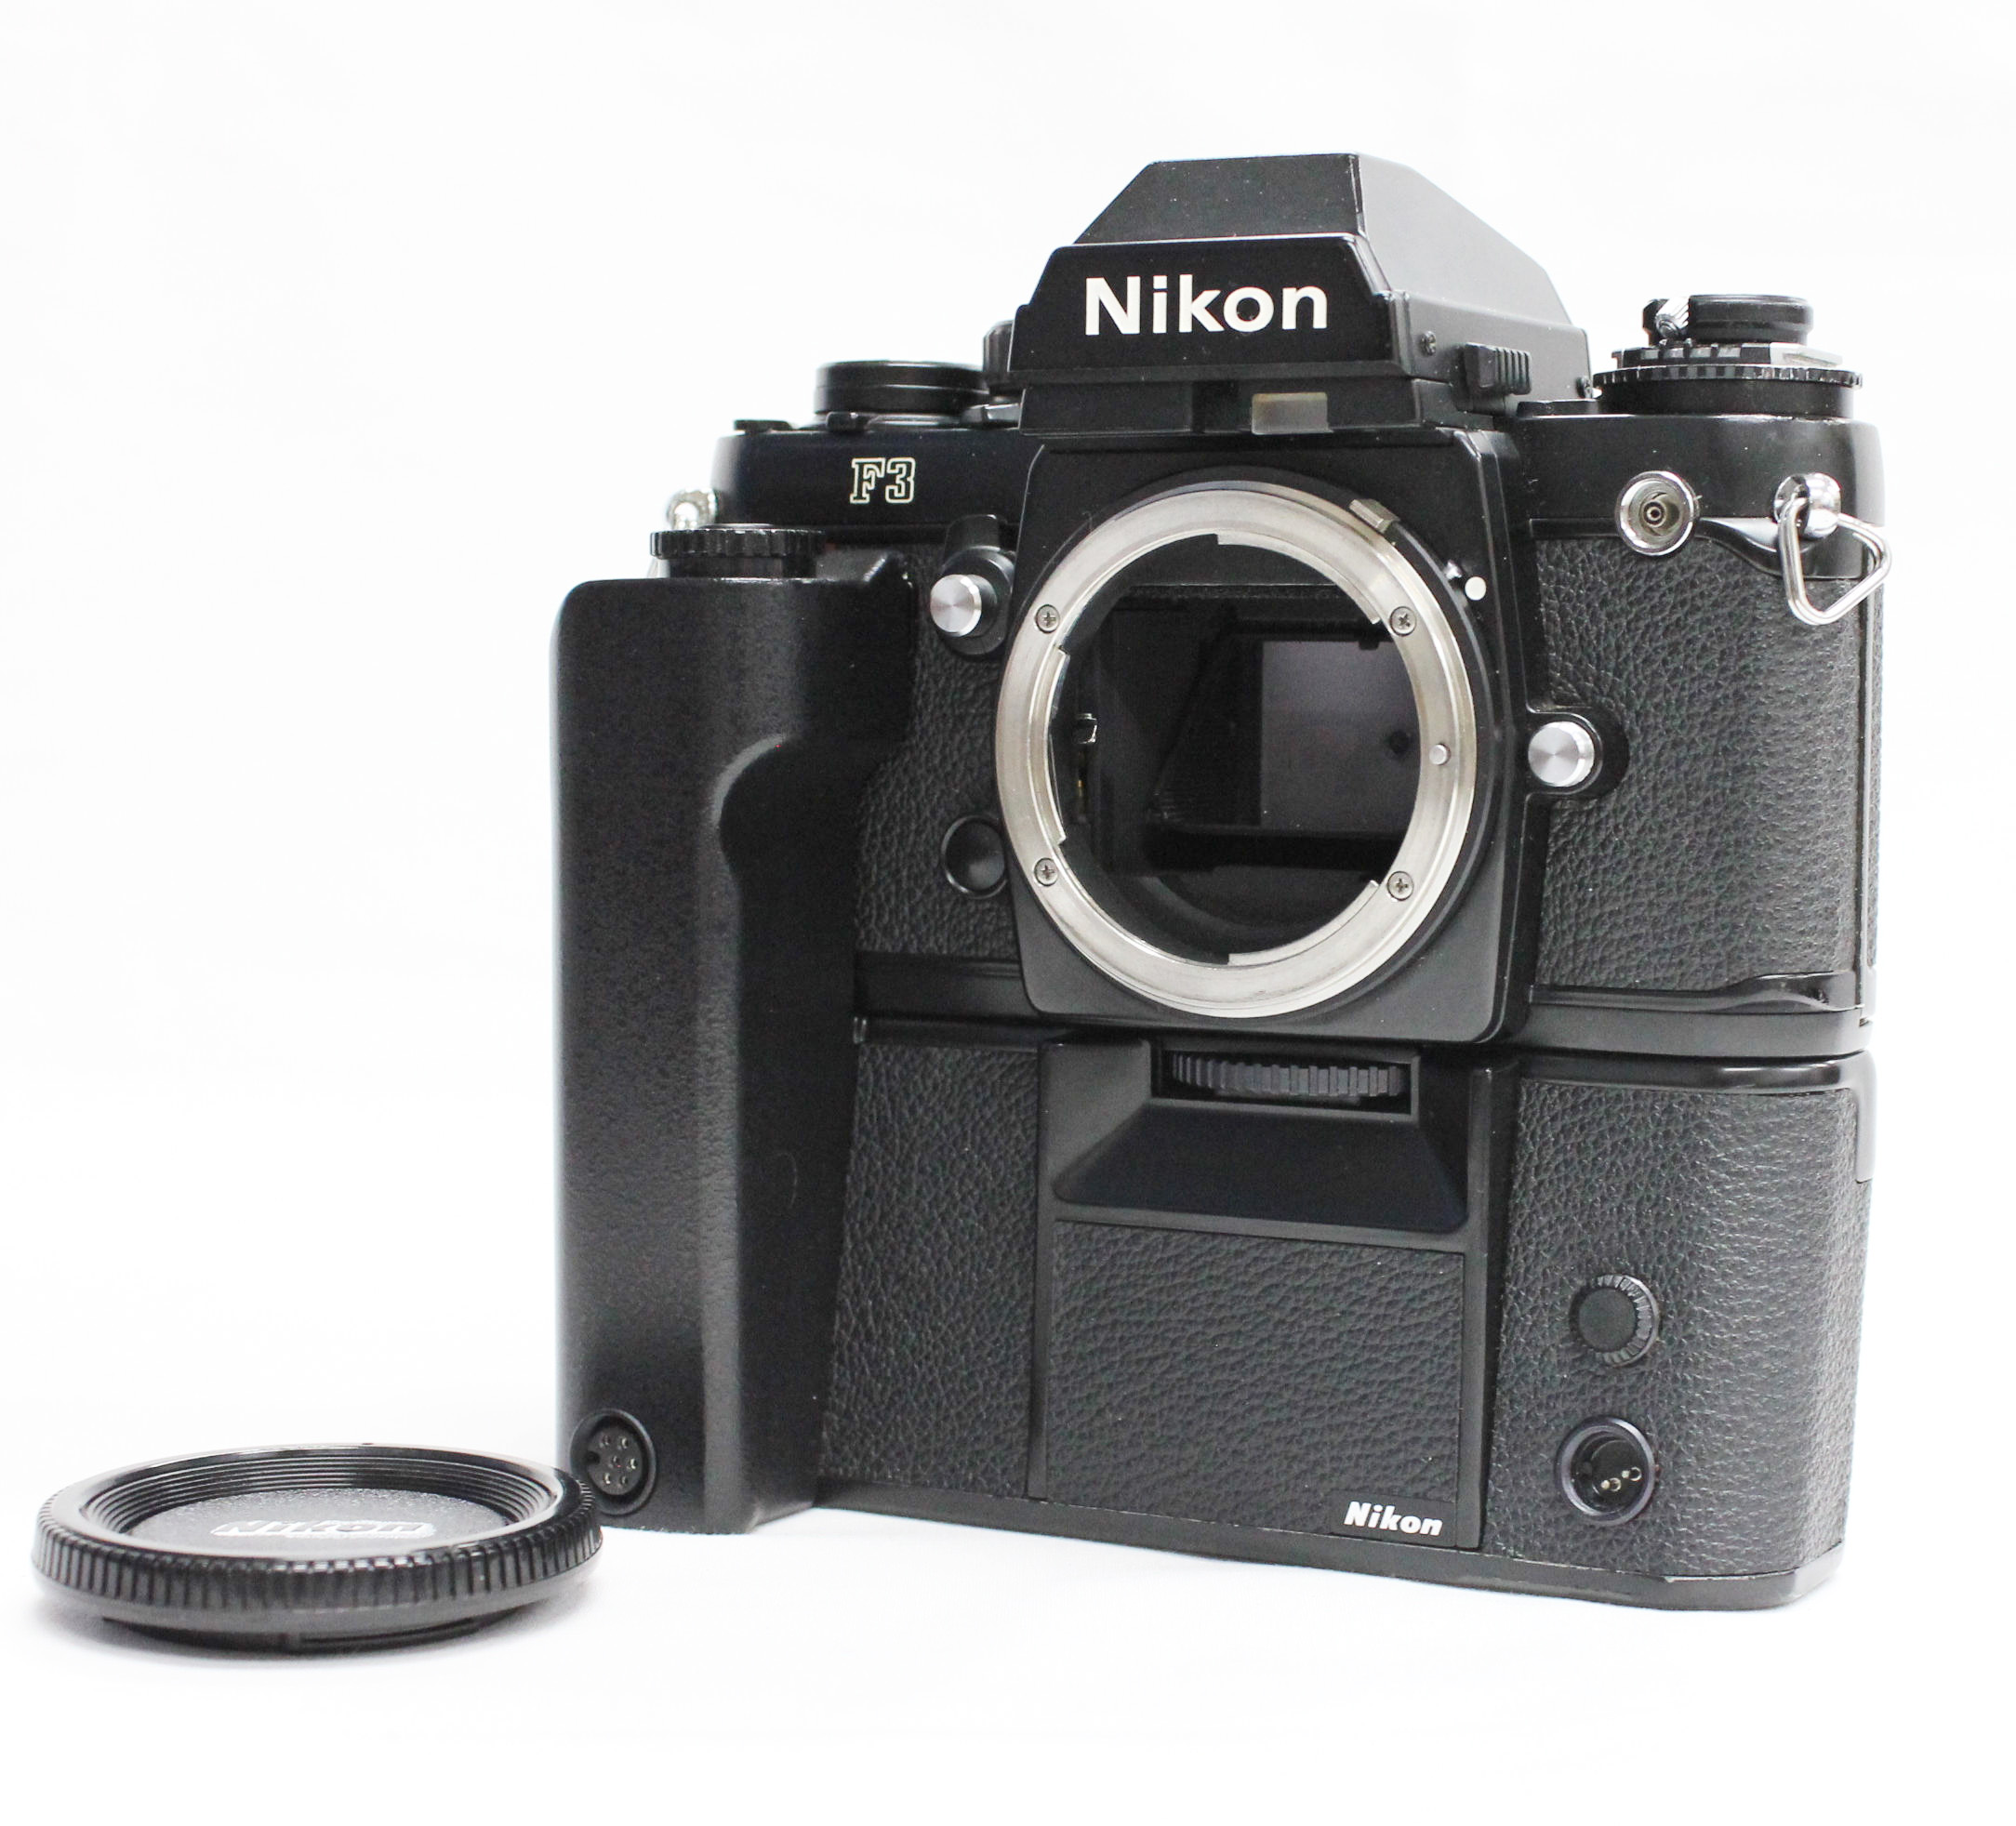 Japan Used Camera Shop | [Excellent +++++] Nikon F3 35mm SLR Film Camera Body with Motor Drive MD-4 from Japan